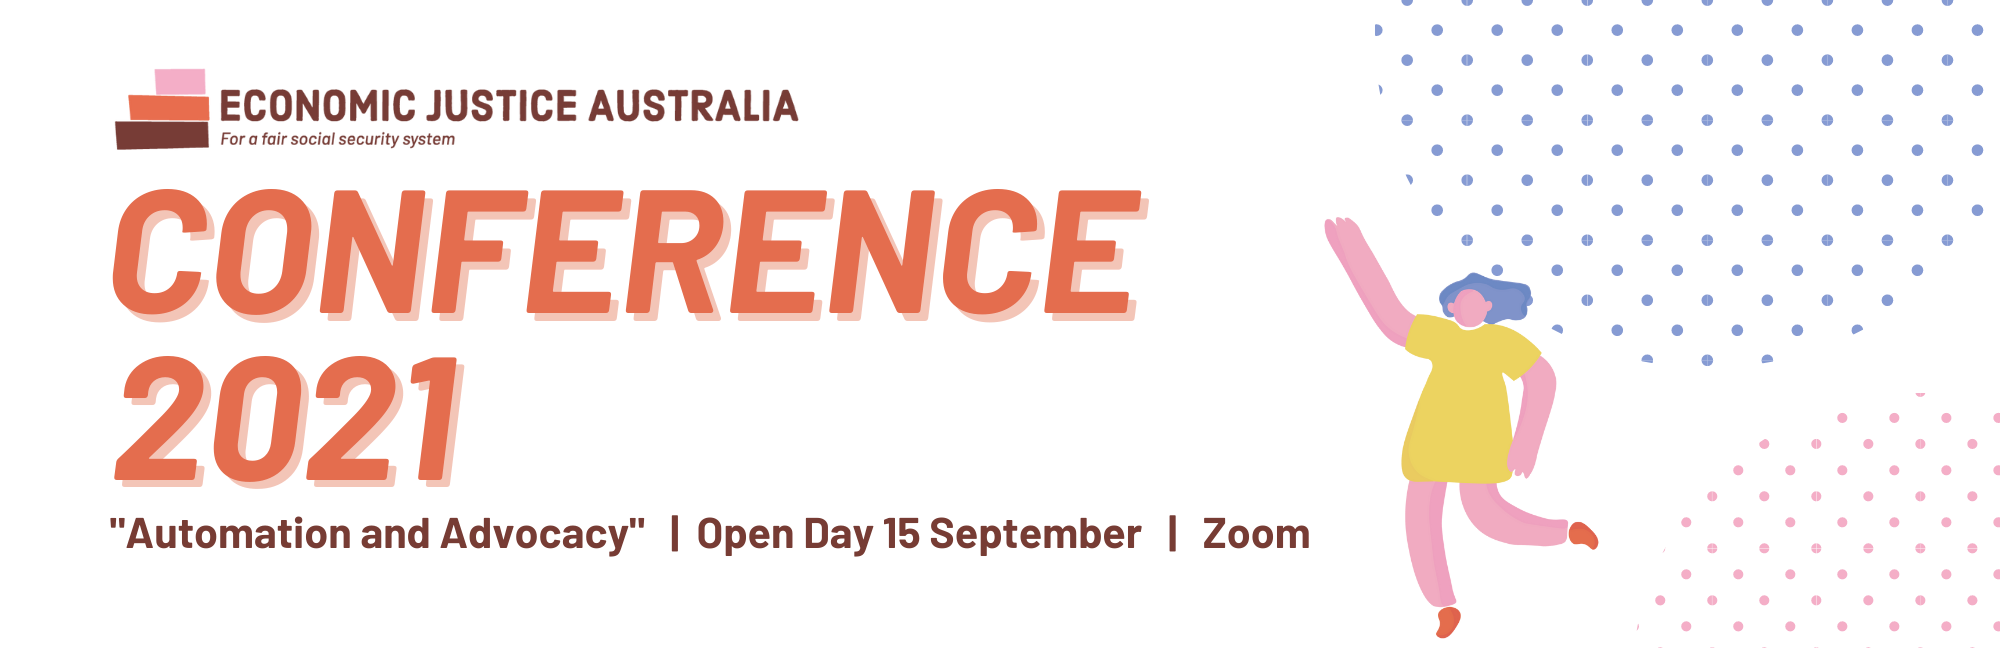 "Economic Justice Australia Conference 2021: 'Automation and Advocacy' | Open Day 15 September | Zoom"